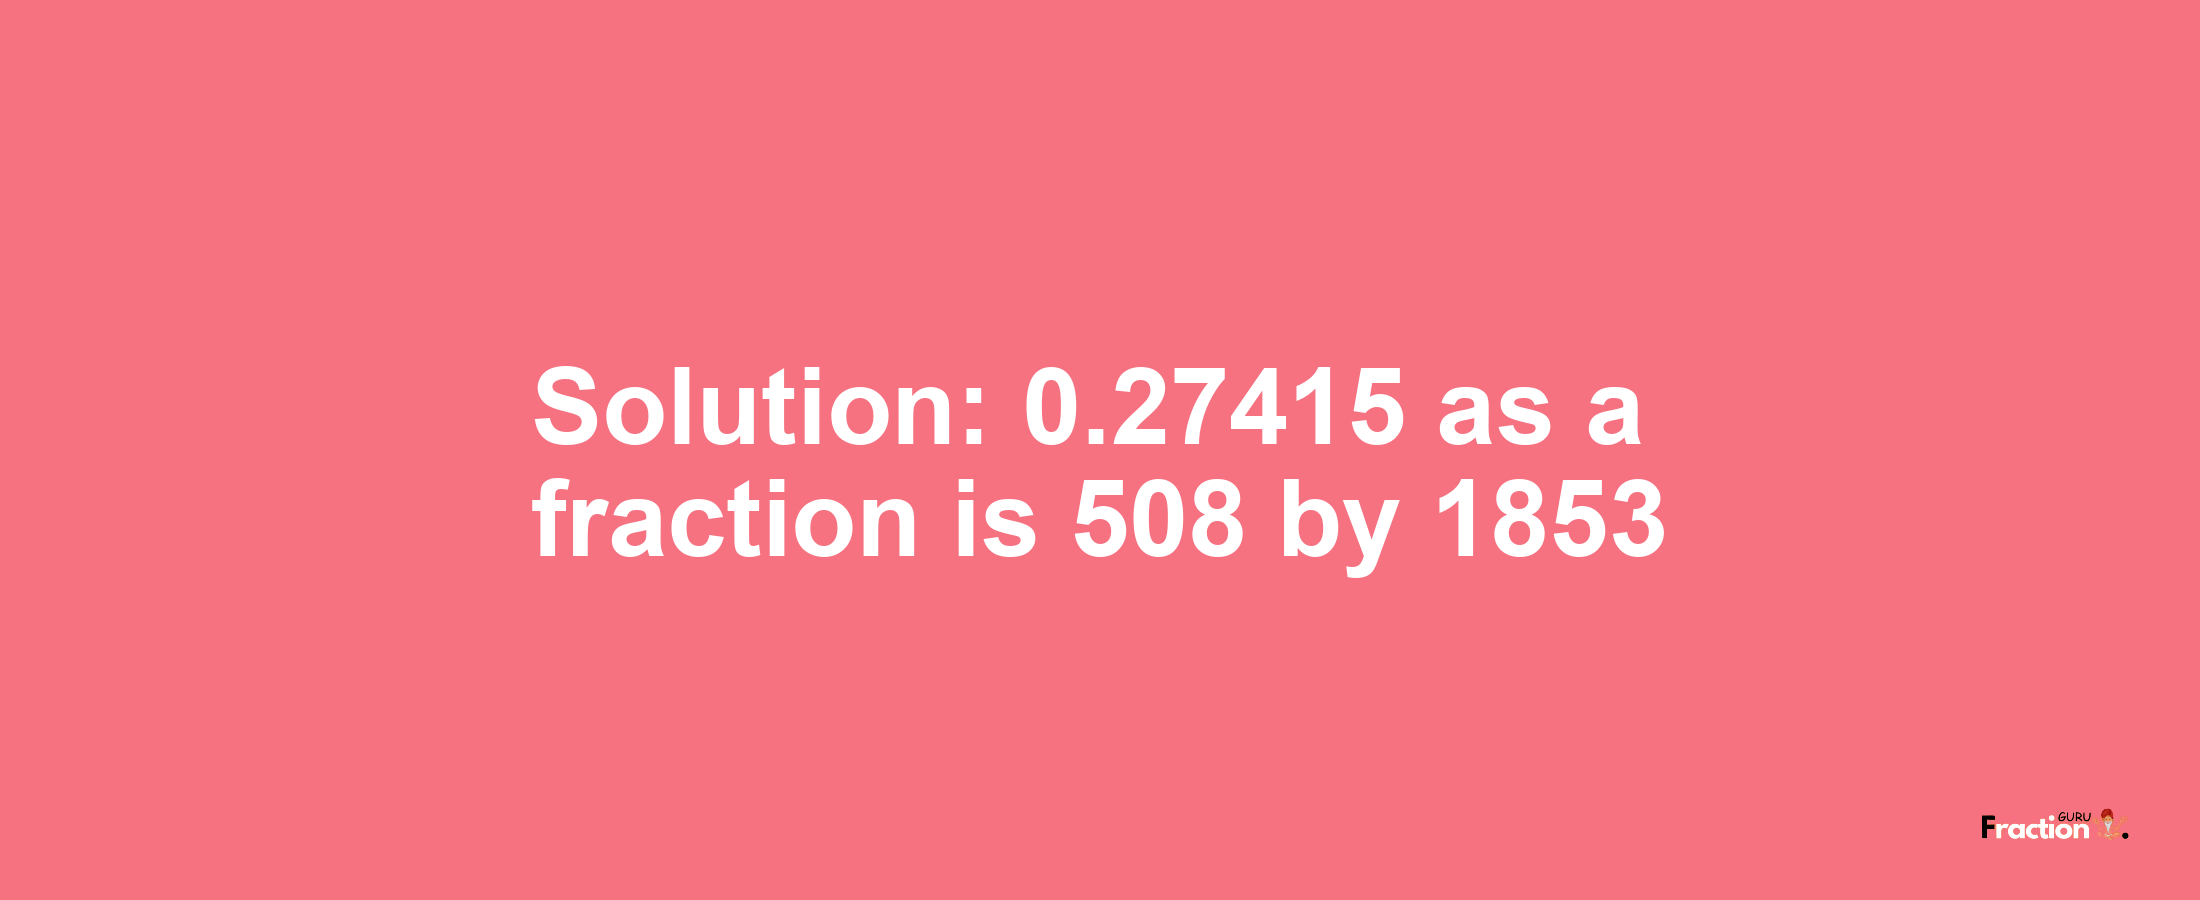 Solution:0.27415 as a fraction is 508/1853